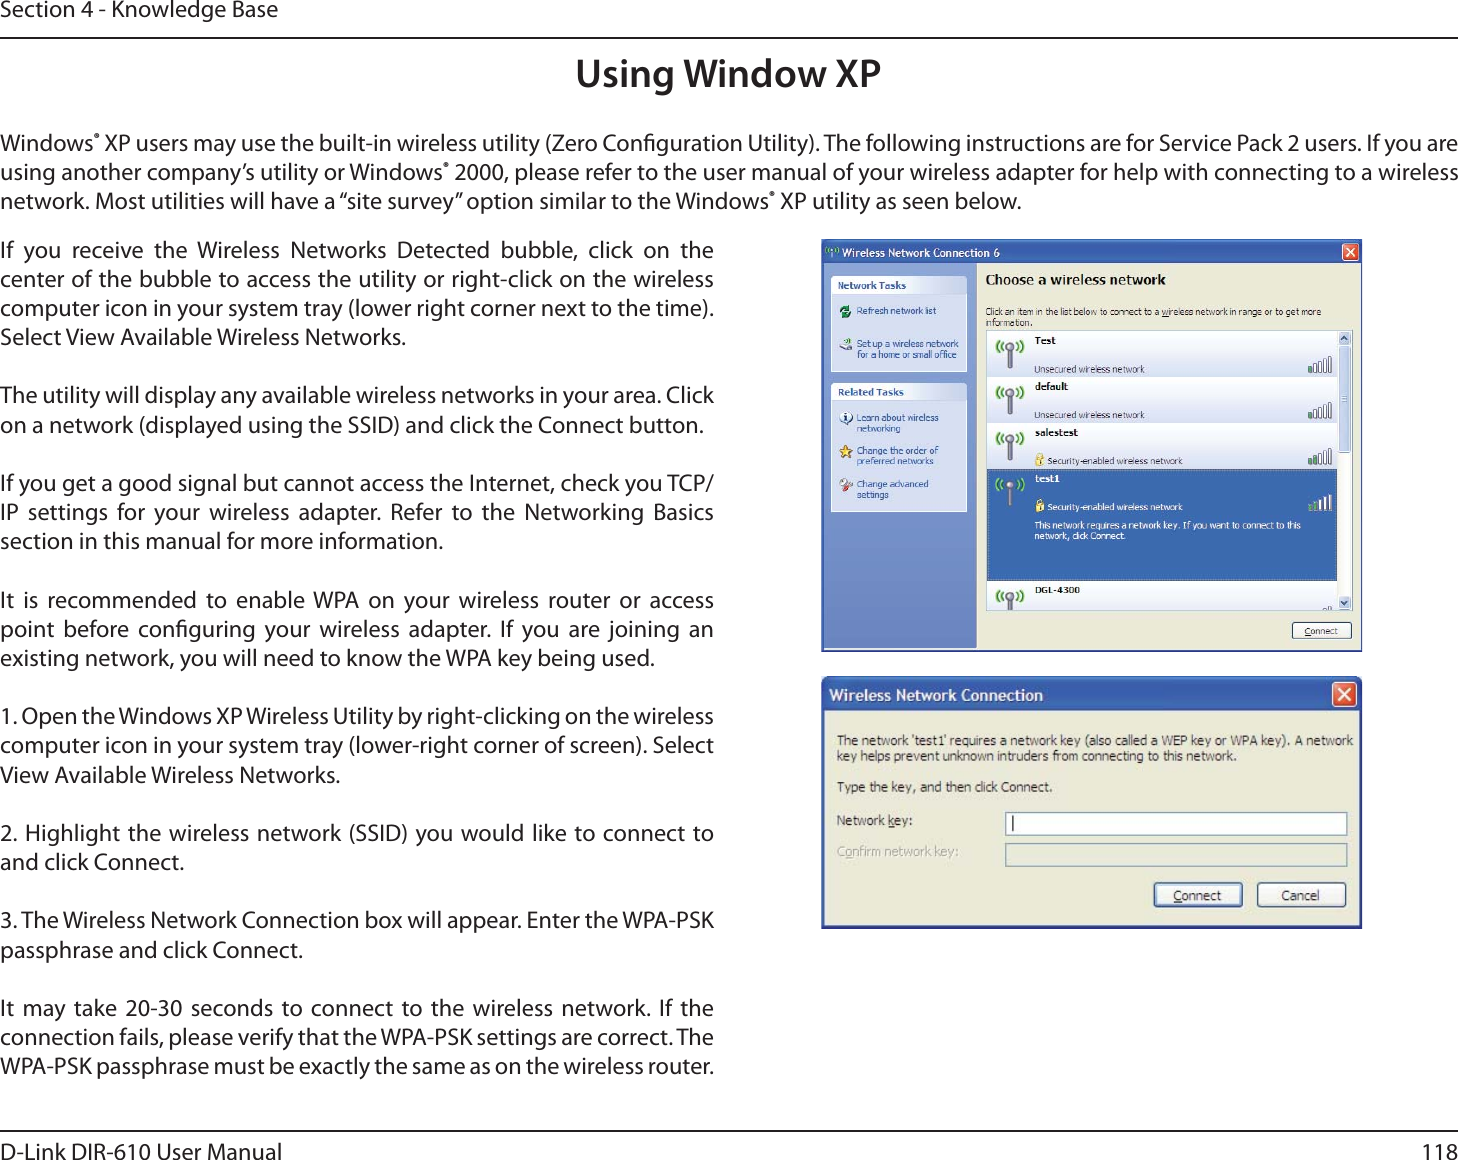 118D-Link DIR-610 User ManualSection 4 - Knowledge BaseUsing Window XPWindows® XP users may use the built-in wireless utility (Zero Conguration Utility). The following instructions are for Service Pack 2 users. If you are using another company’s utility or Windows® 2000, please refer to the user manual of your wireless adapter for help with connecting to a wireless network. Most utilities will have a “site survey” option similar to the Windows® XP utility as seen below.If you receive the Wireless Networks Detected bubble, click on the center of the bubble to access the utility or right-click on the wireless computer icon in your system tray (lower right corner next to the time). Select View Available Wireless Networks.The utility will display any available wireless networks in your area. Click on a network (displayed using the SSID) and click the Connect button.If you get a good signal but cannot access the Internet, check you TCP/ IP settings for your wireless adapter. Refer to the Networking Basics section in this manual for more information.It is recommended to enable WPA on your wireless router or access point before conguring your wireless adapter. If you are joining an existing network, you will need to know the WPA key being used.1. Open the Windows XP Wireless Utility by right-clicking on the wireless computer icon in your system tray (lower-right corner of screen). Select View Available Wireless Networks.2. Highlight the wireless network (SSID) you would like to connect to and click Connect.3. The Wireless Network Connection box will appear. Enter the WPA-PSK passphrase and click Connect.It may take 20-30 seconds to connect to the wireless network. If the connection fails, please verify that the WPA-PSK settings are correct. The WPA-PSK passphrase must be exactly the same as on the wireless router.